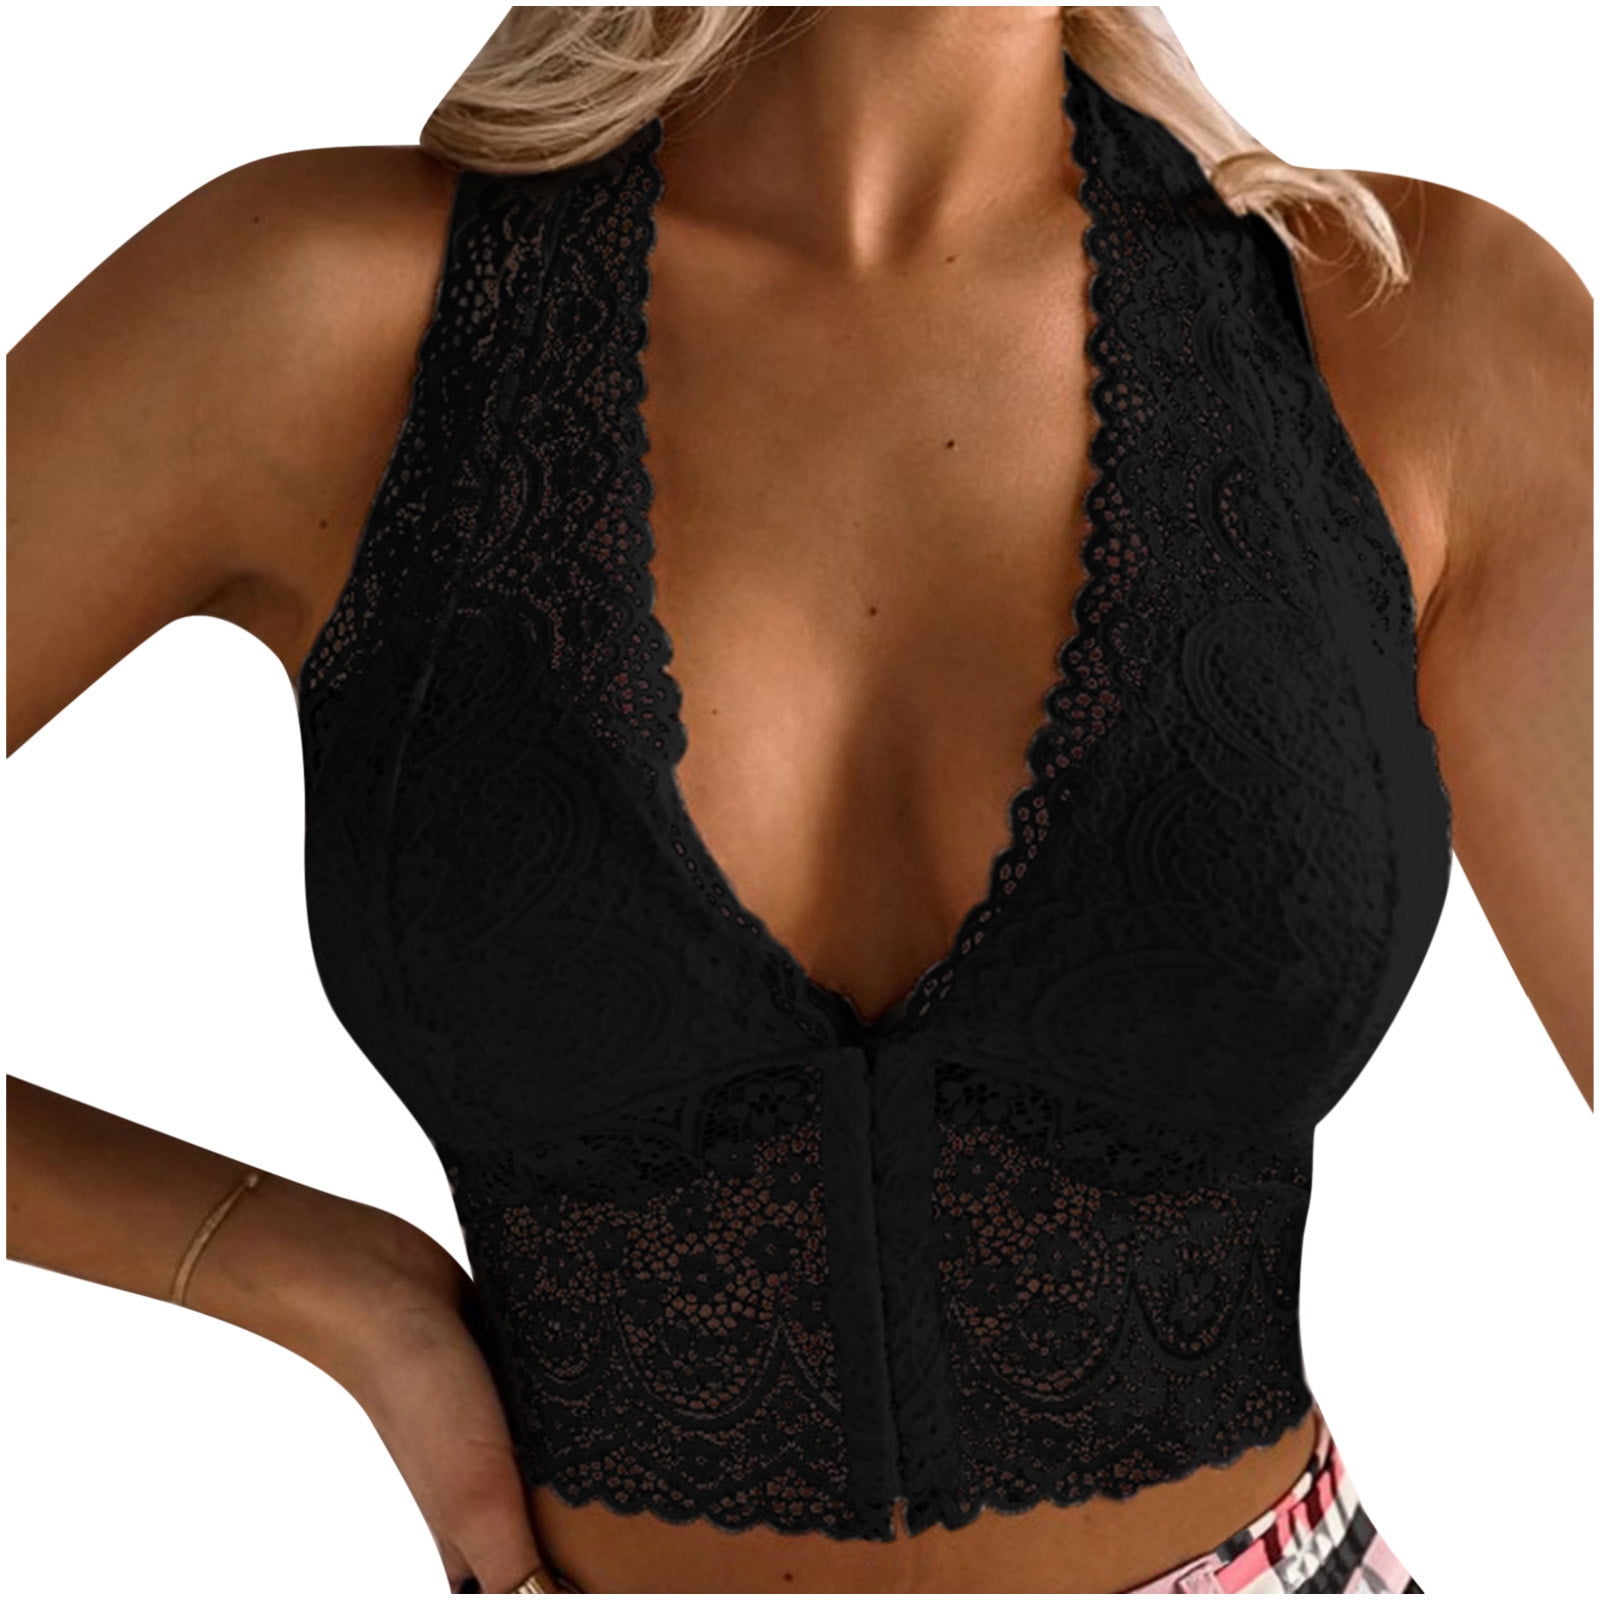 Lace Halter Bra Bralette Top Hook and Eye Closure Back Wirefree